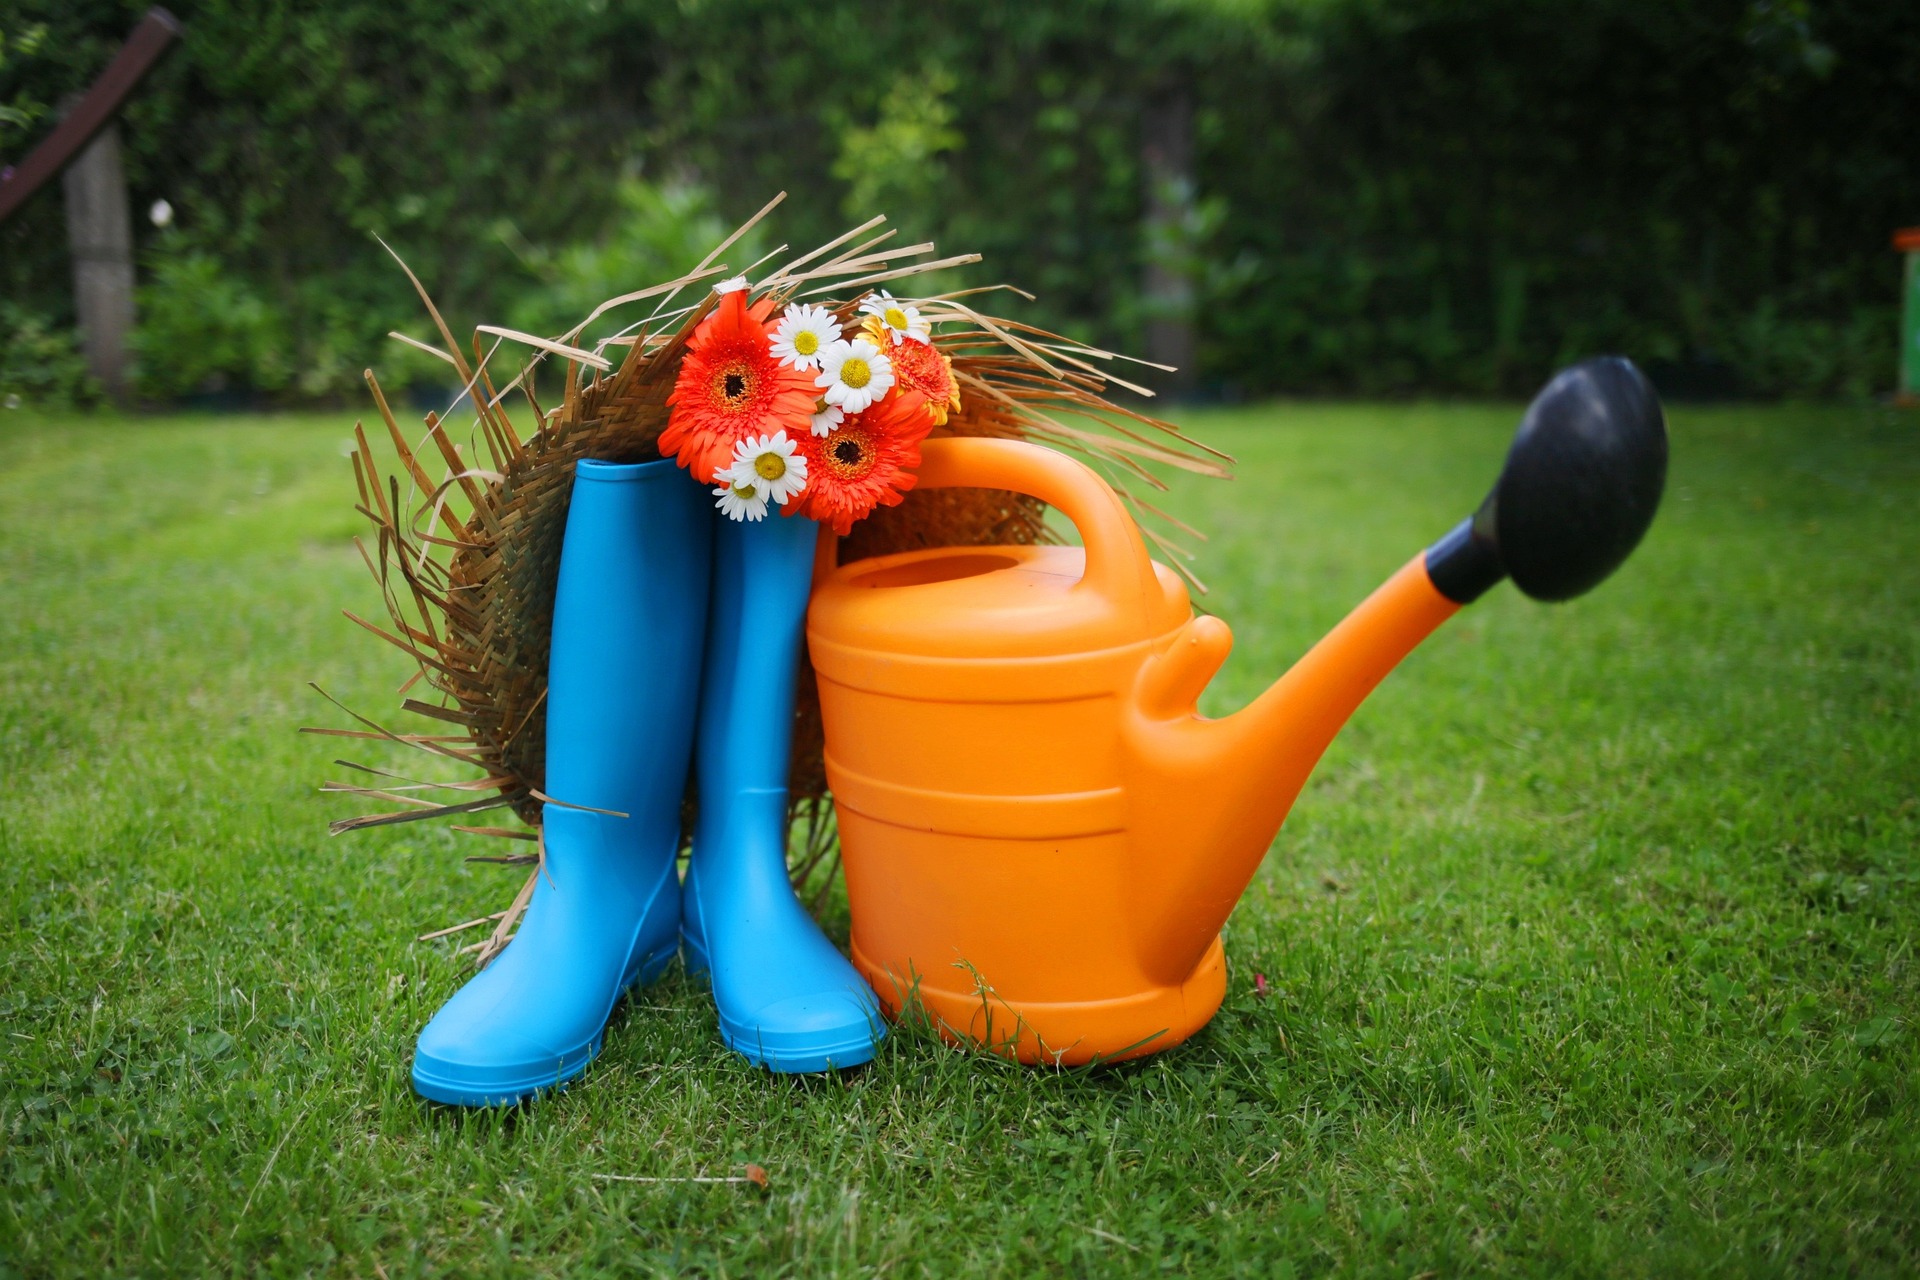 Blue gardening boots with orange watering can.